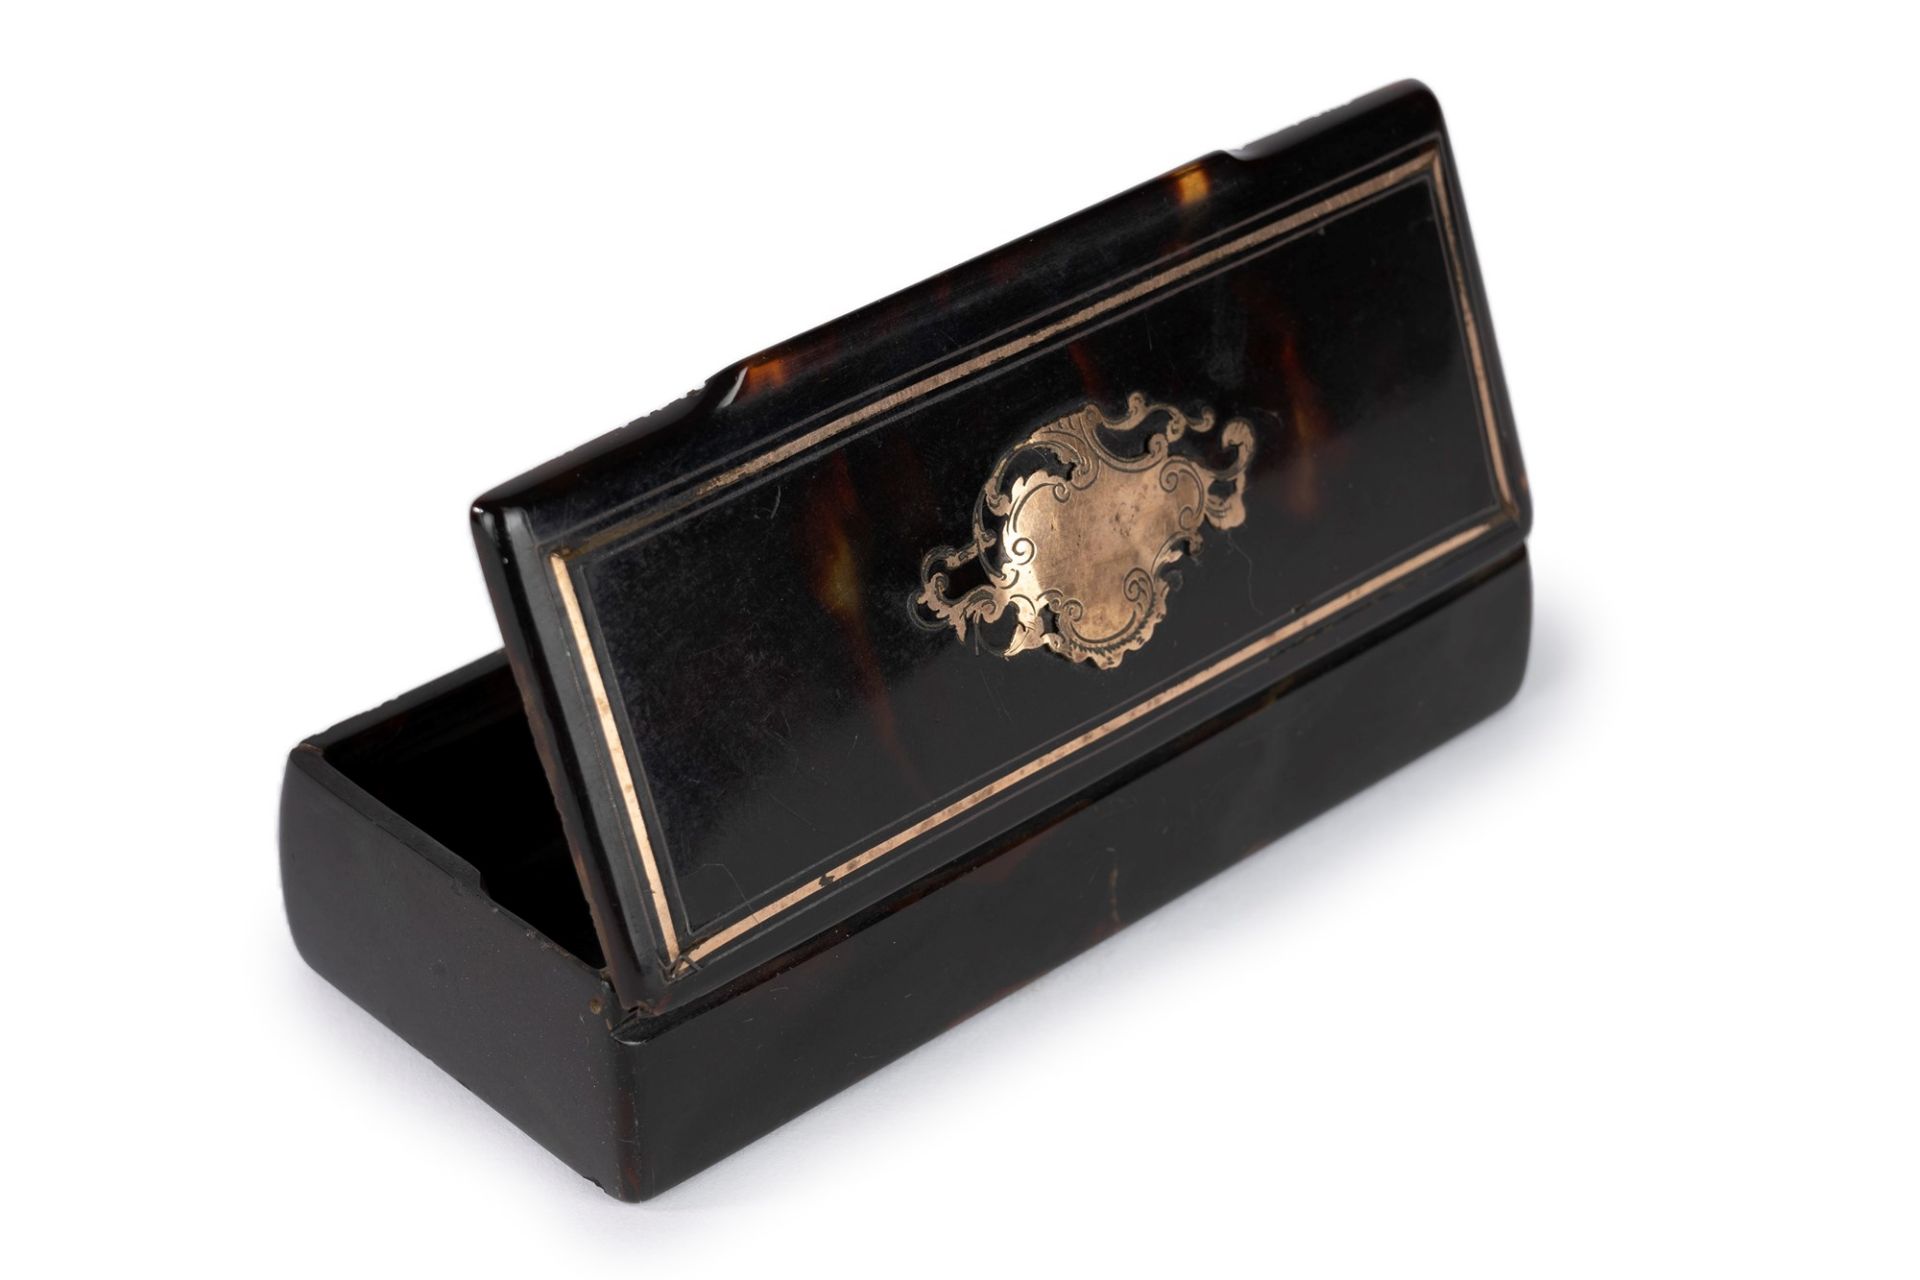 Lot consisting of a small wooden and mother-of-pearl box and another black one, 19th century - Image 4 of 8